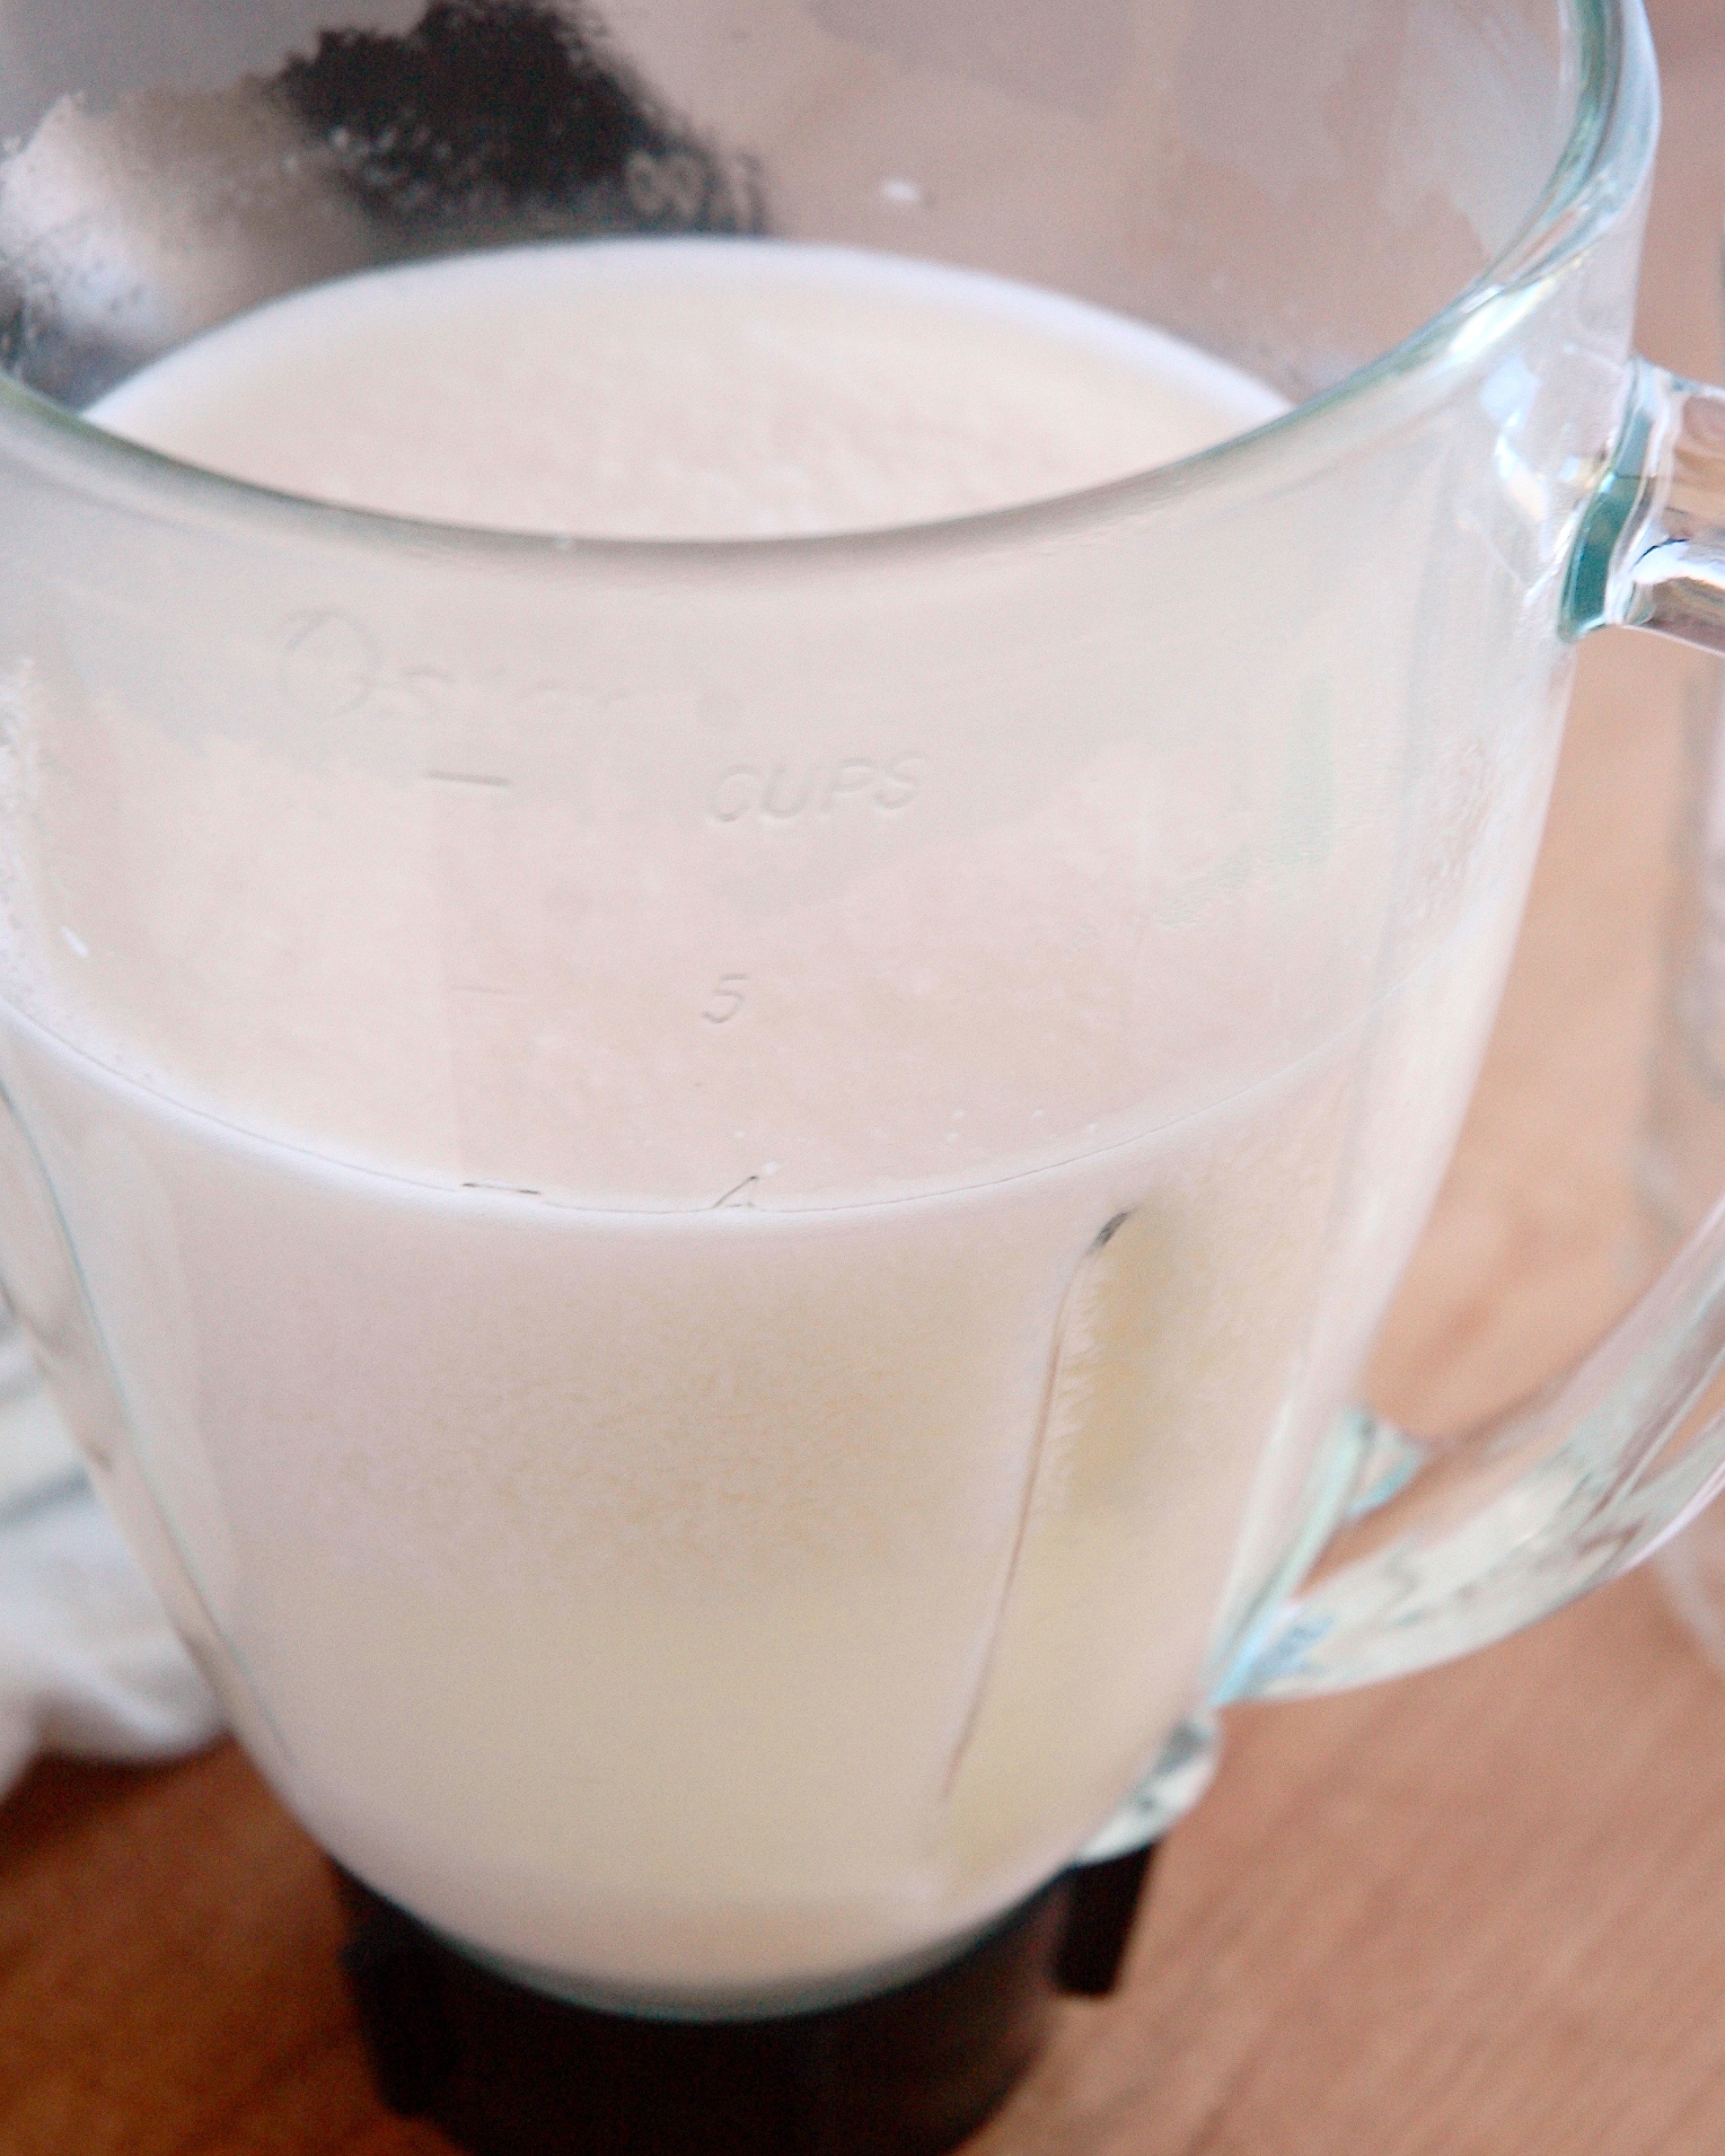 Homemade coconut milk recipe that's rich and creamy, and as close to "straight from the source" as you can get without having to crack open a fresh coconut!